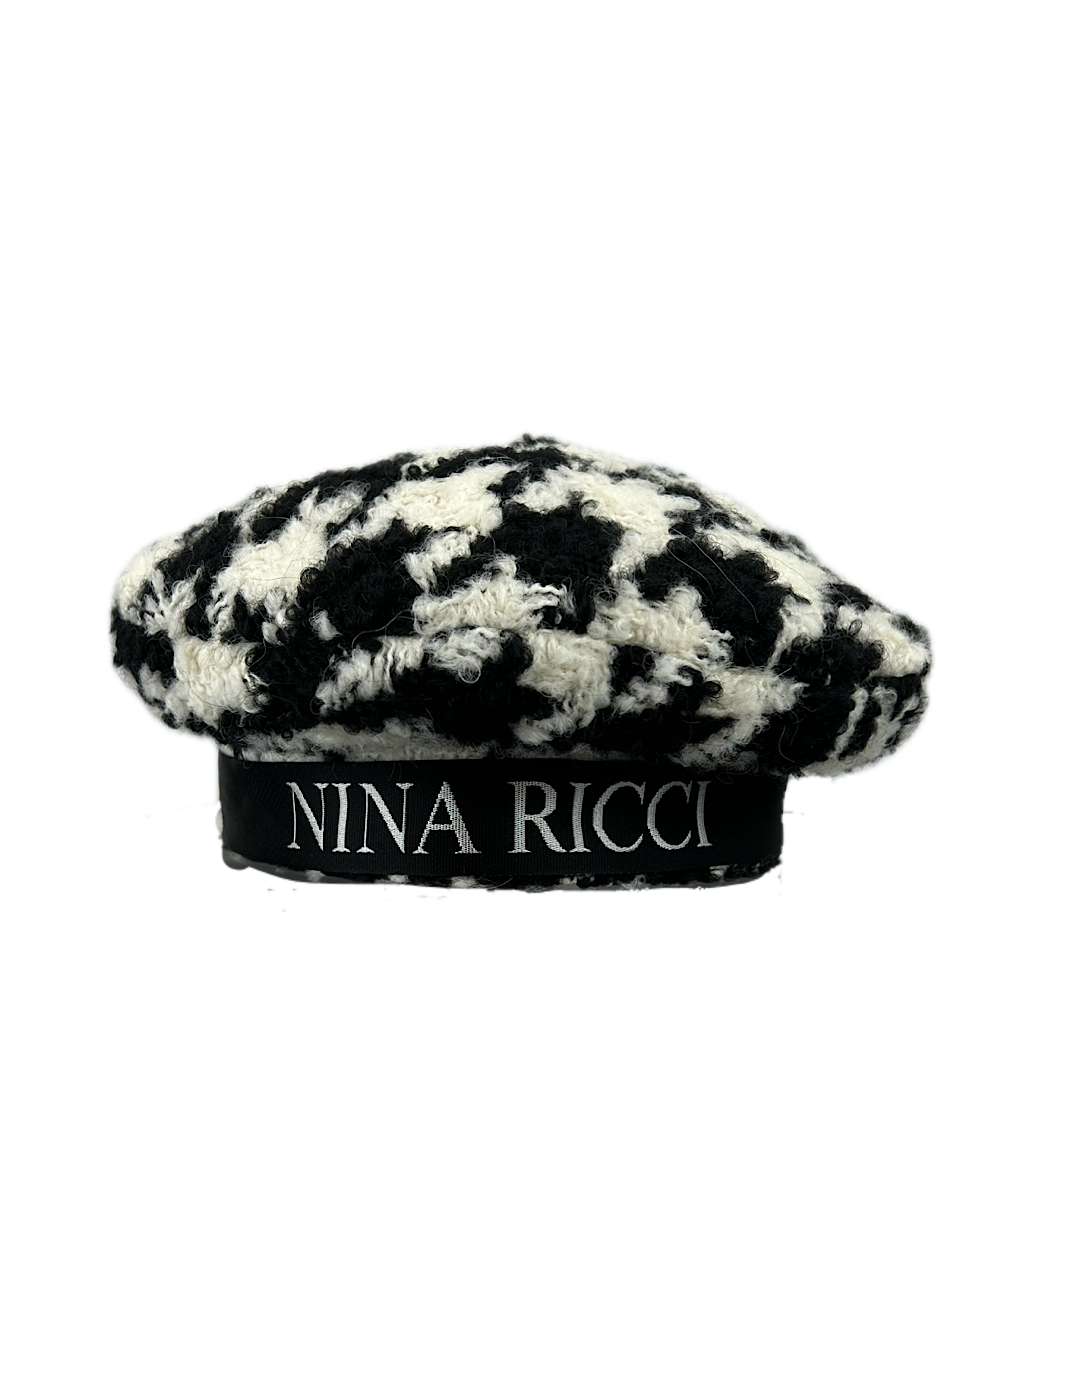 <img class='new_mark_img1' src='https://img.shop-pro.jp/img/new/icons47.gif' style='border:none;display:inline;margin:0px;padding:0px;width:auto;' />NINARICCI / HOUNDSTOOTH PATTERN BERET